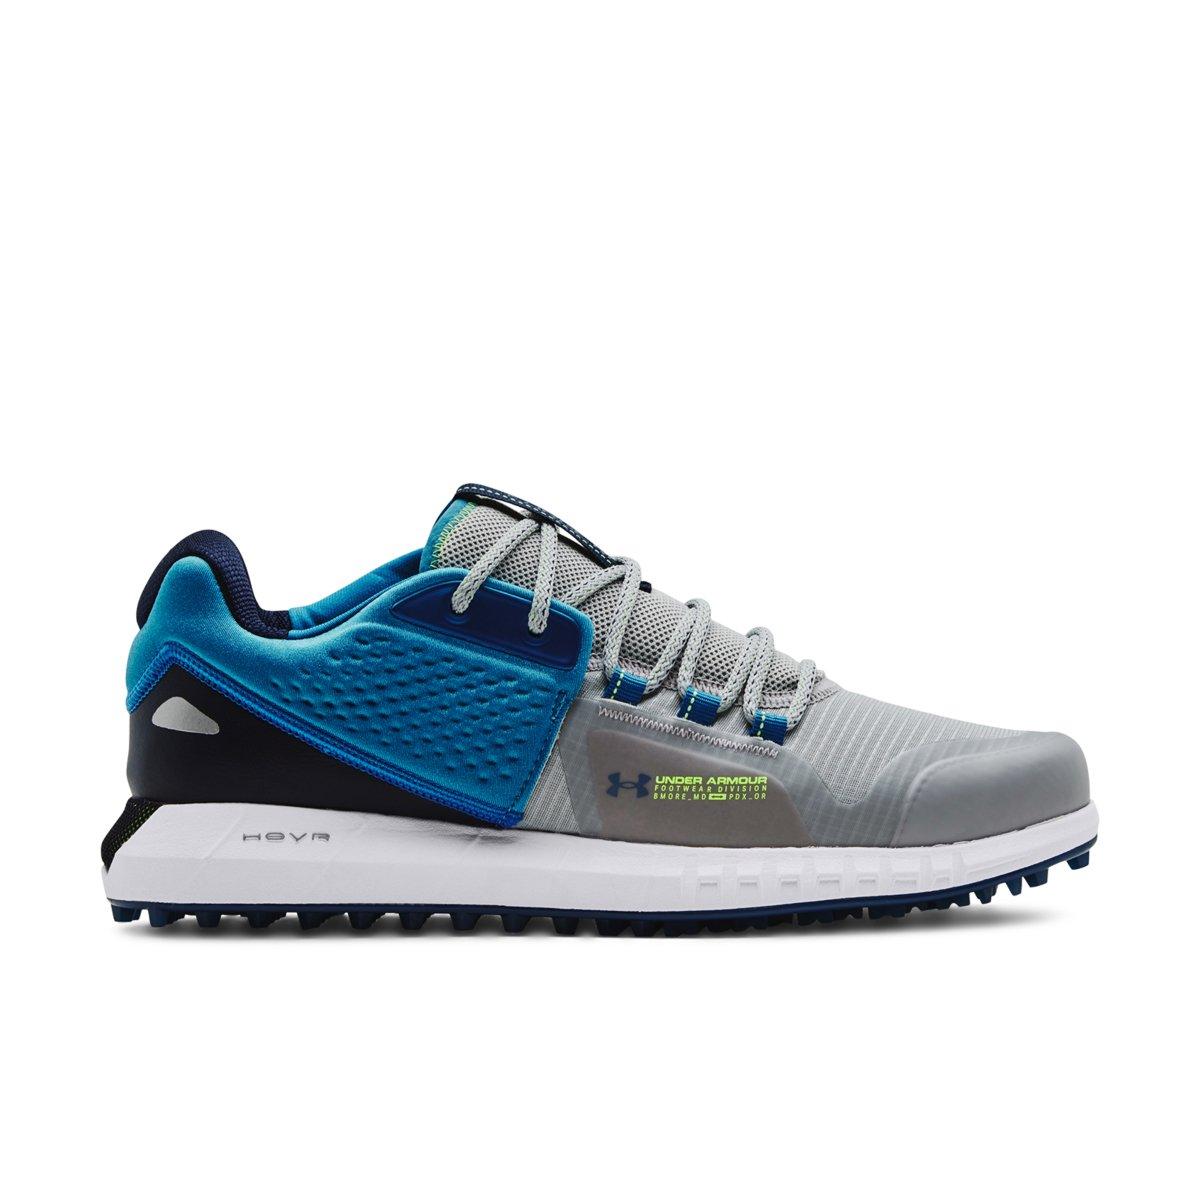 Under Armour HOVR Forge Shoe Review - Golf Monthly Reviews